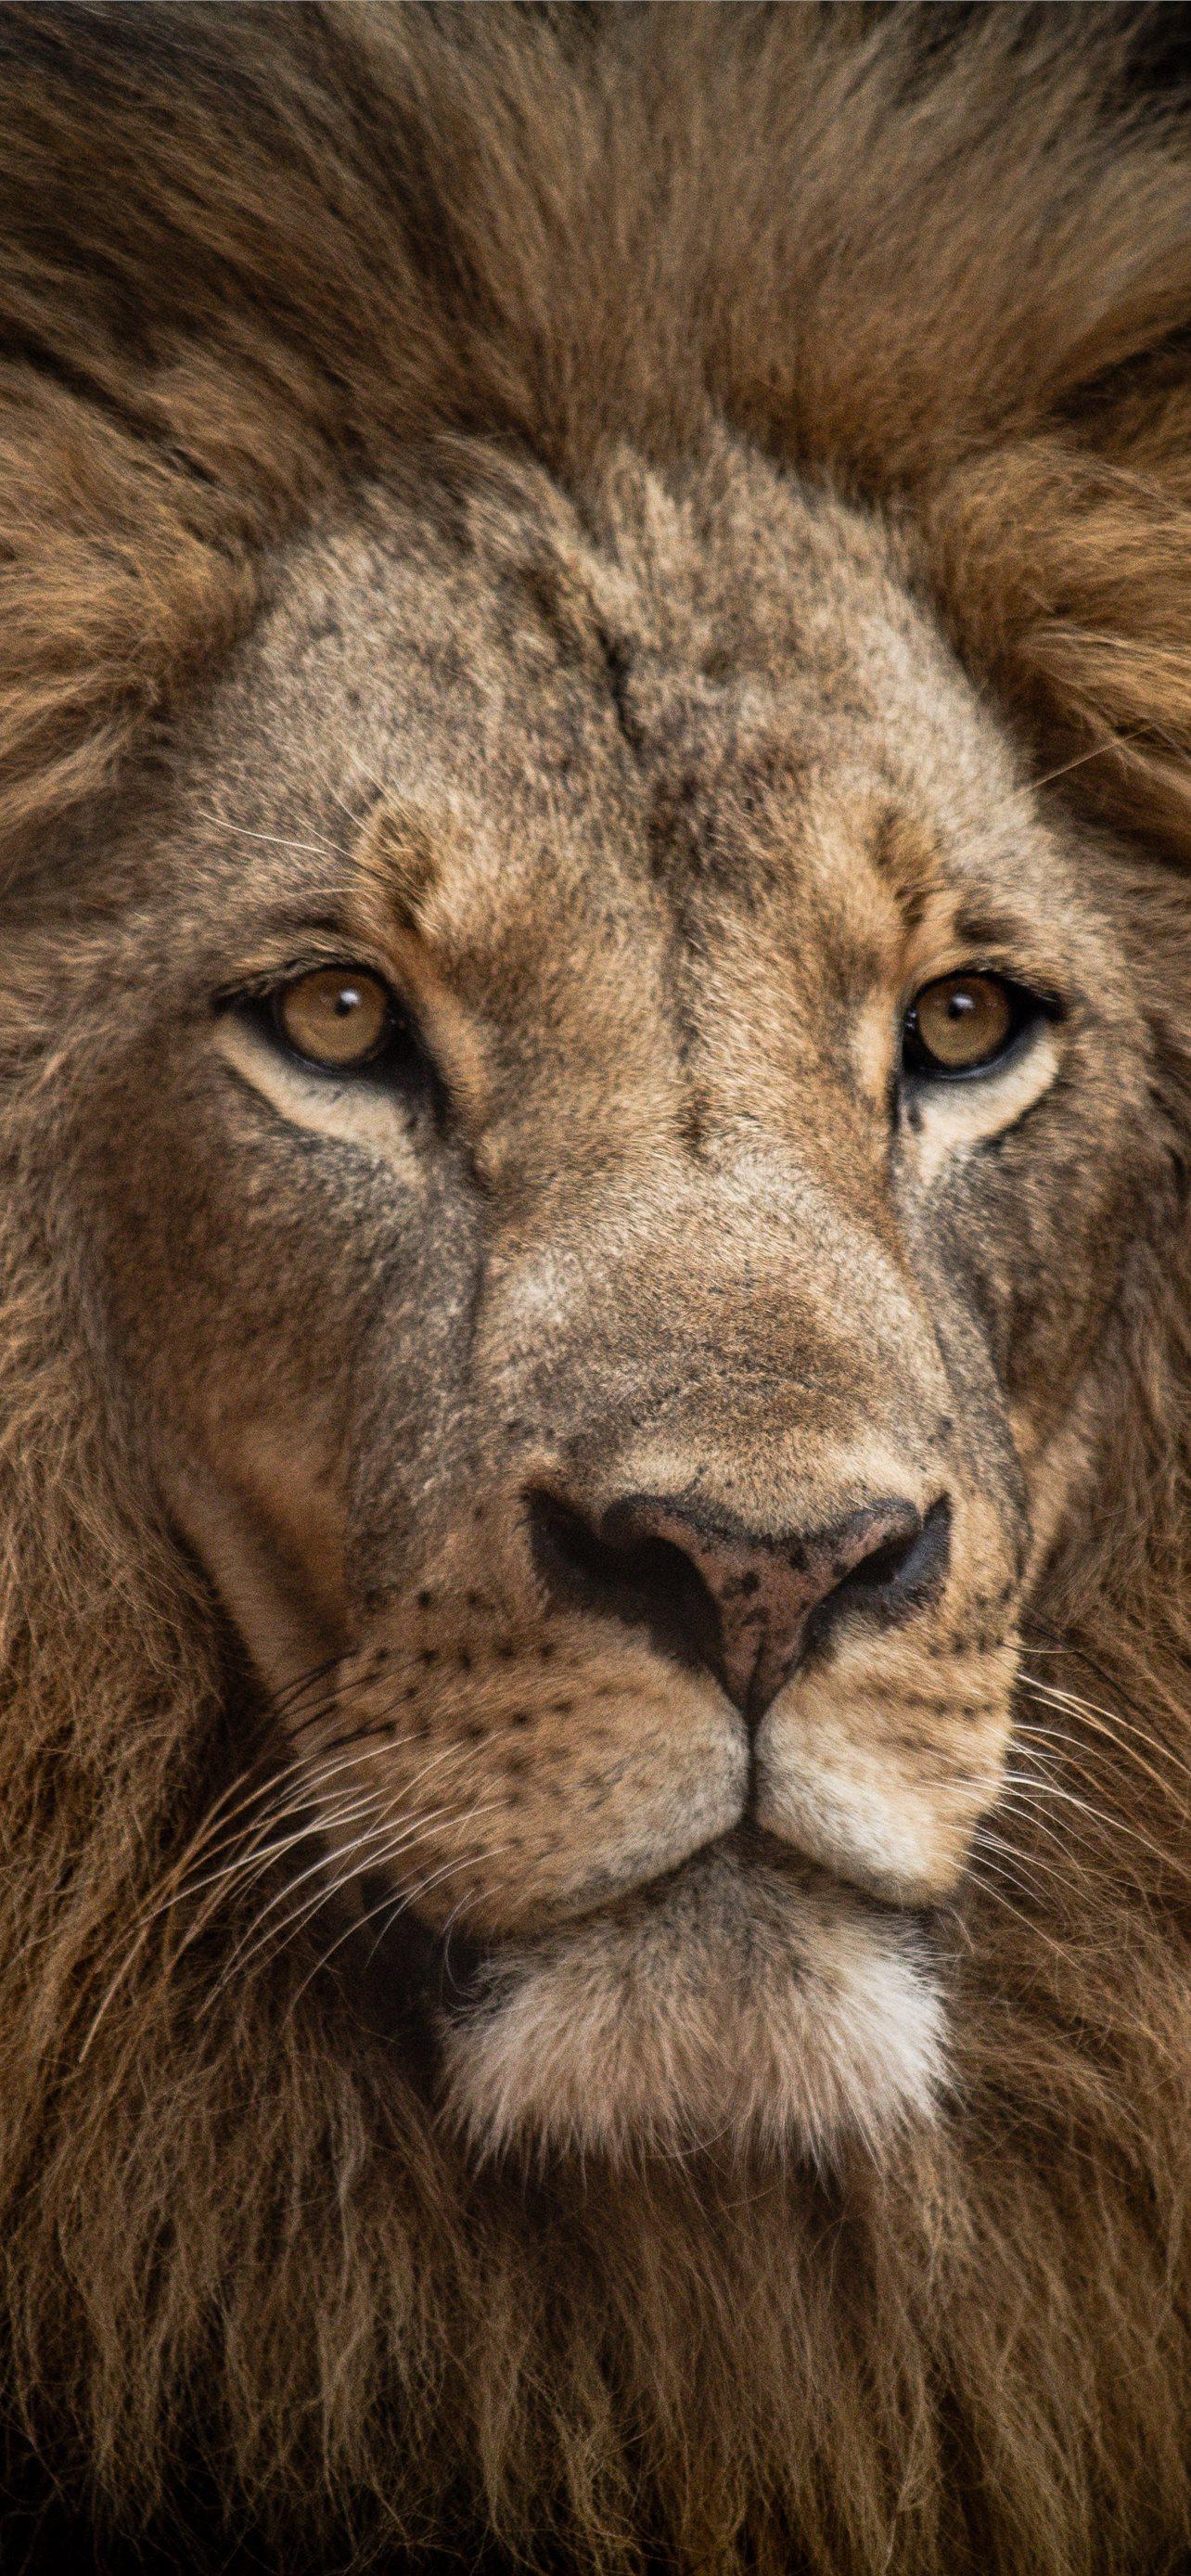 Lion In Close Up Shot iPhone Wallpaper